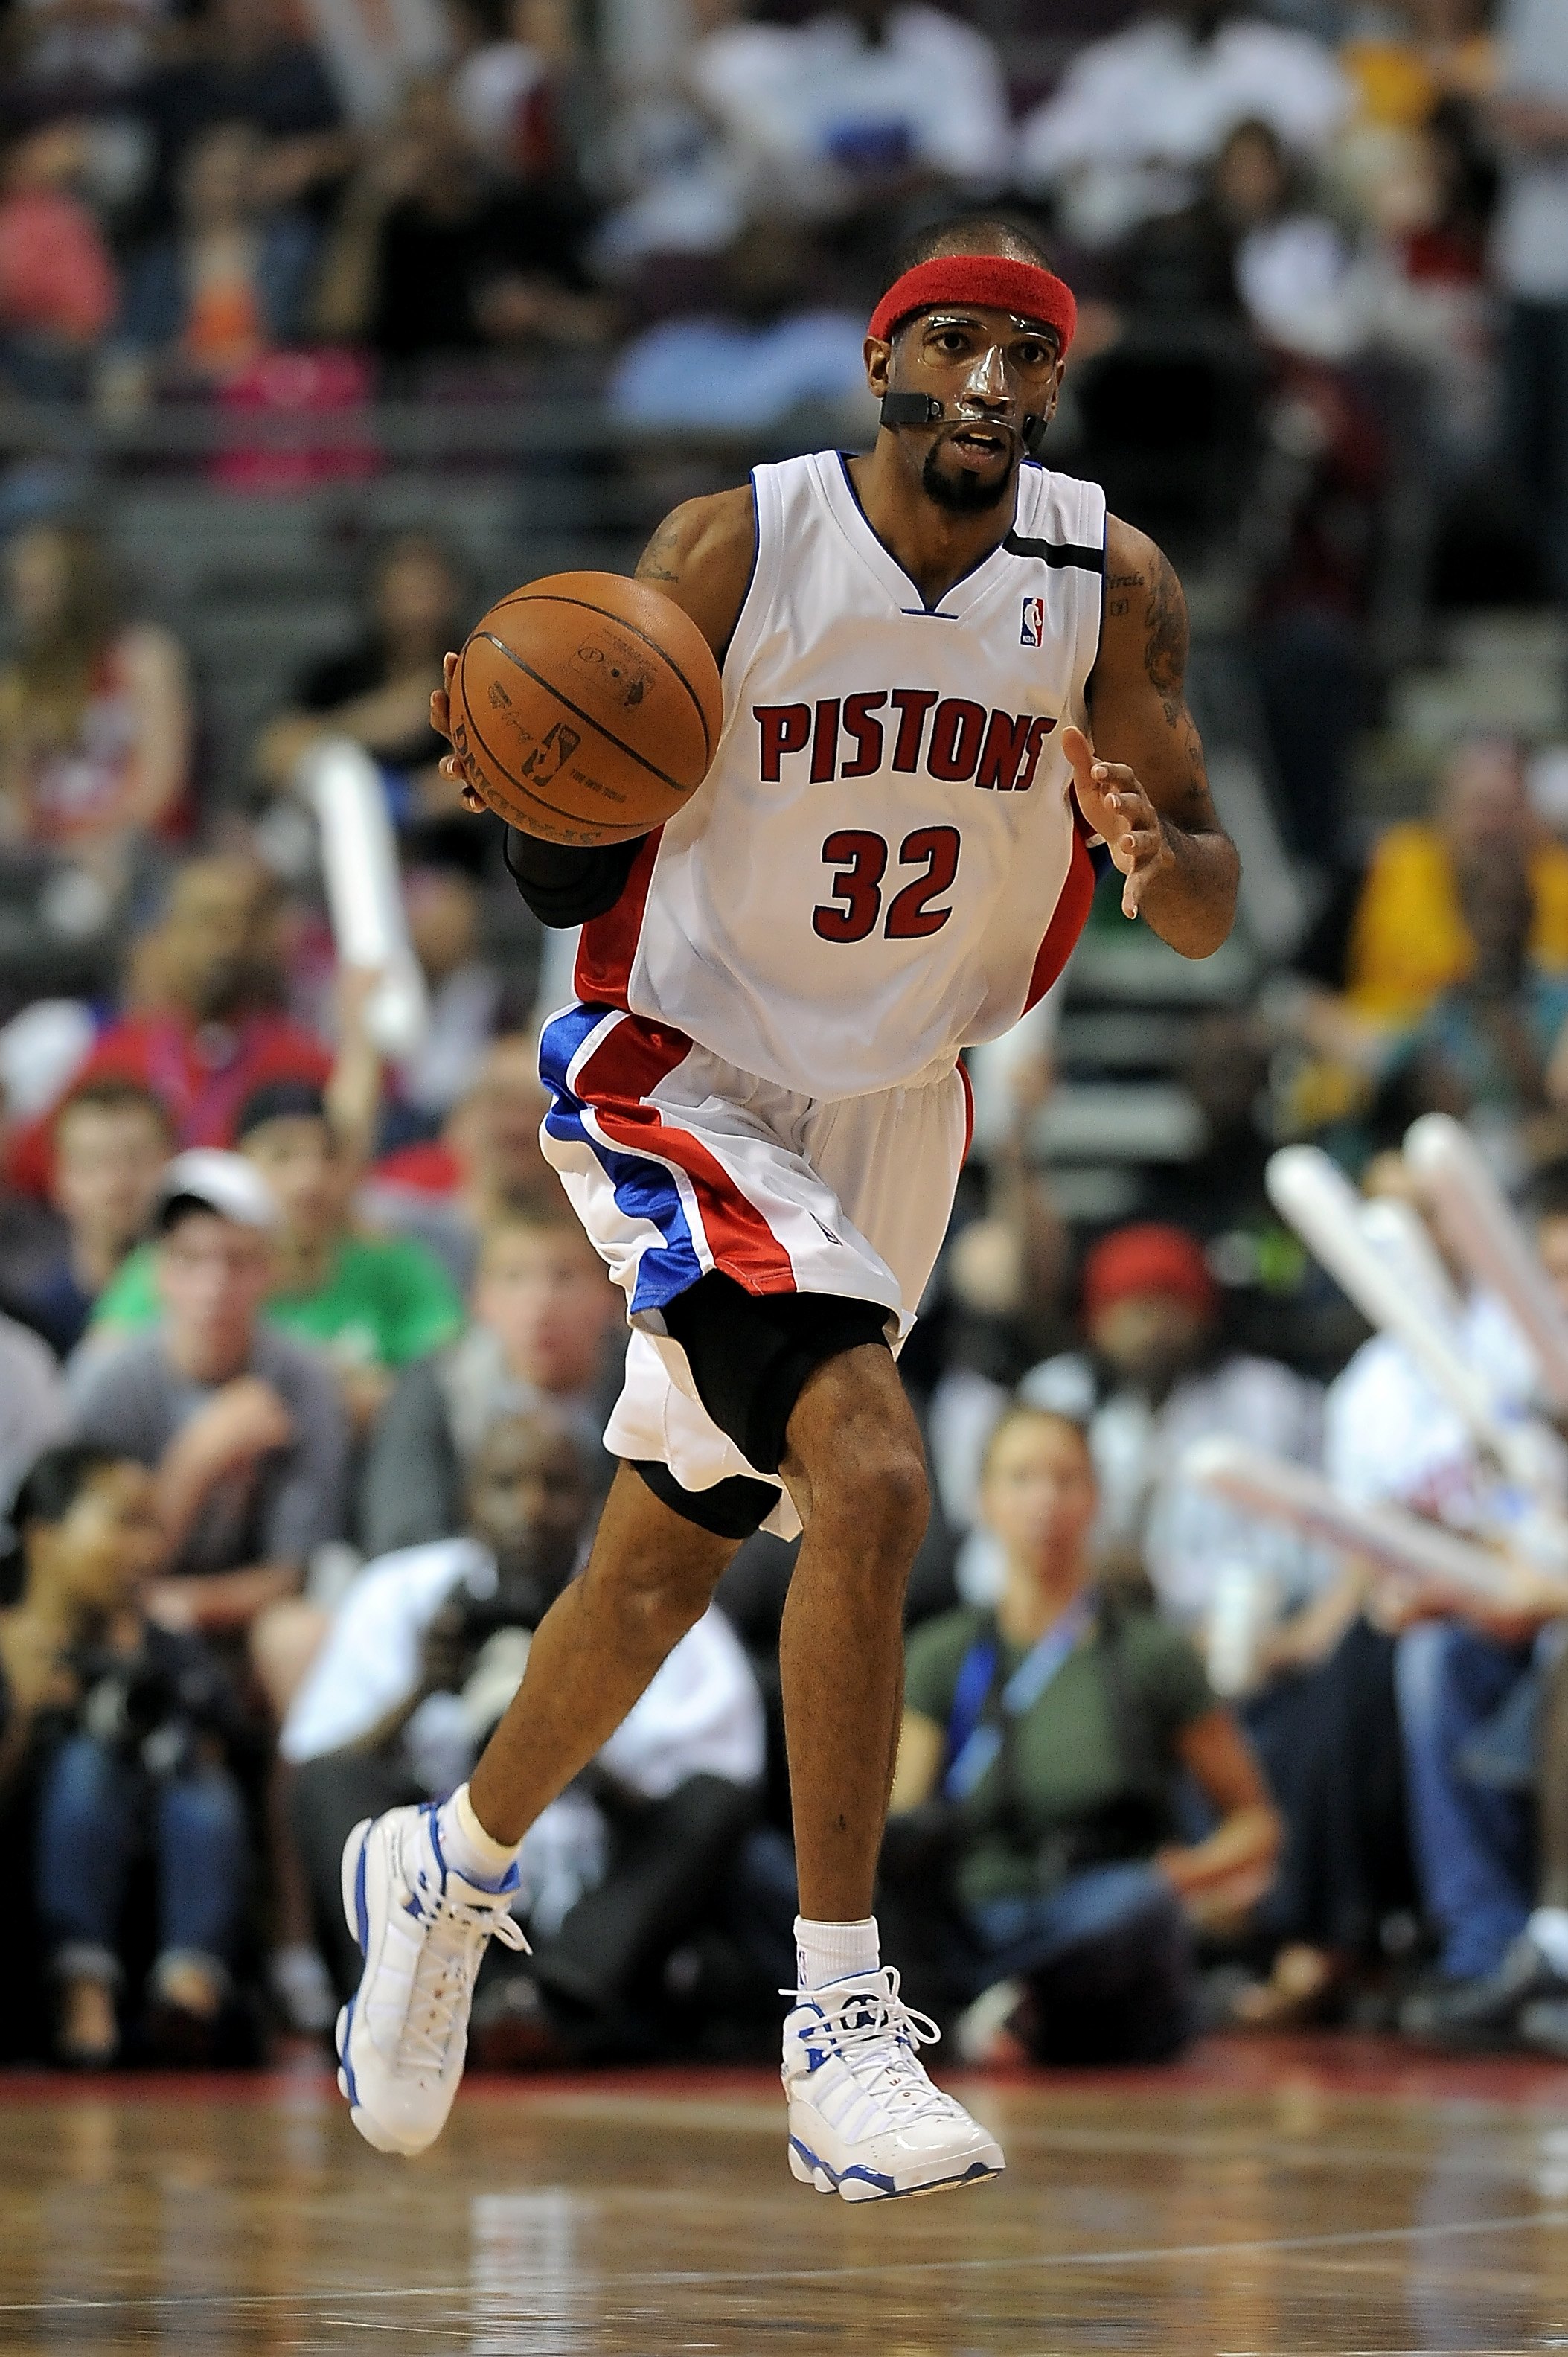 AUBURN HILLS, MI - APRIL 24:  Richard Hamilton #32 of the Detroit Pistons drives the ball up court in Game Three of the Eastern Conference Quarterfinals against the Cleveland Cavaliers during the 2009 NBA Playoffs at the Palace of Auburn Hills on April 24